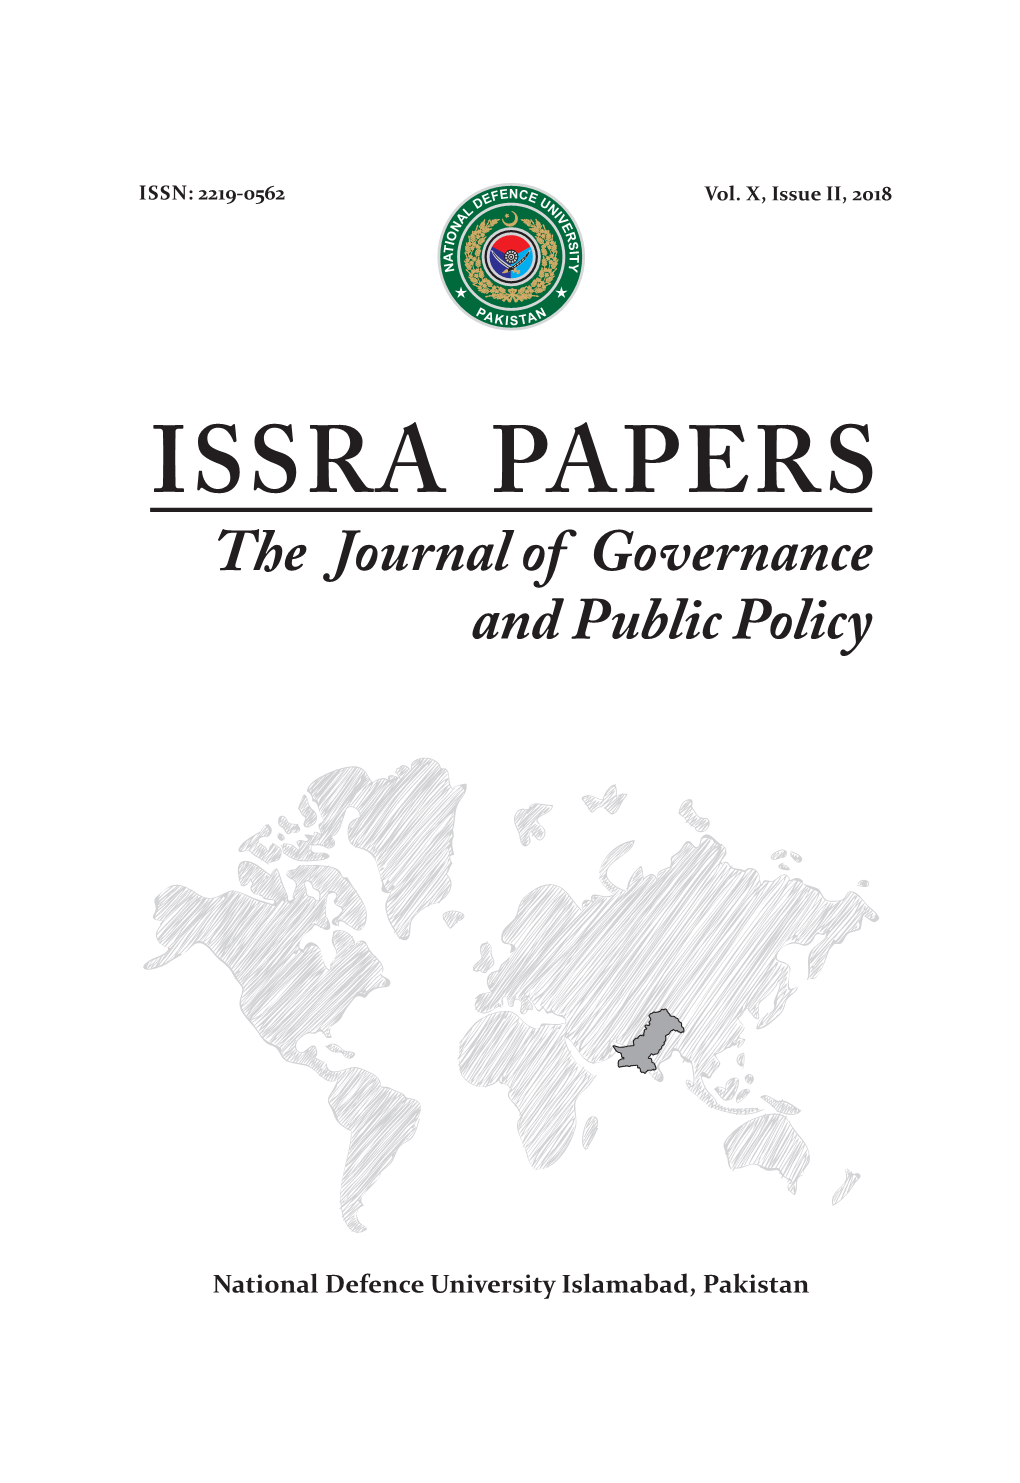 ISSRA Papers Do Not Imply the Official Policy of the National Defence University and Editors Or the Publishers